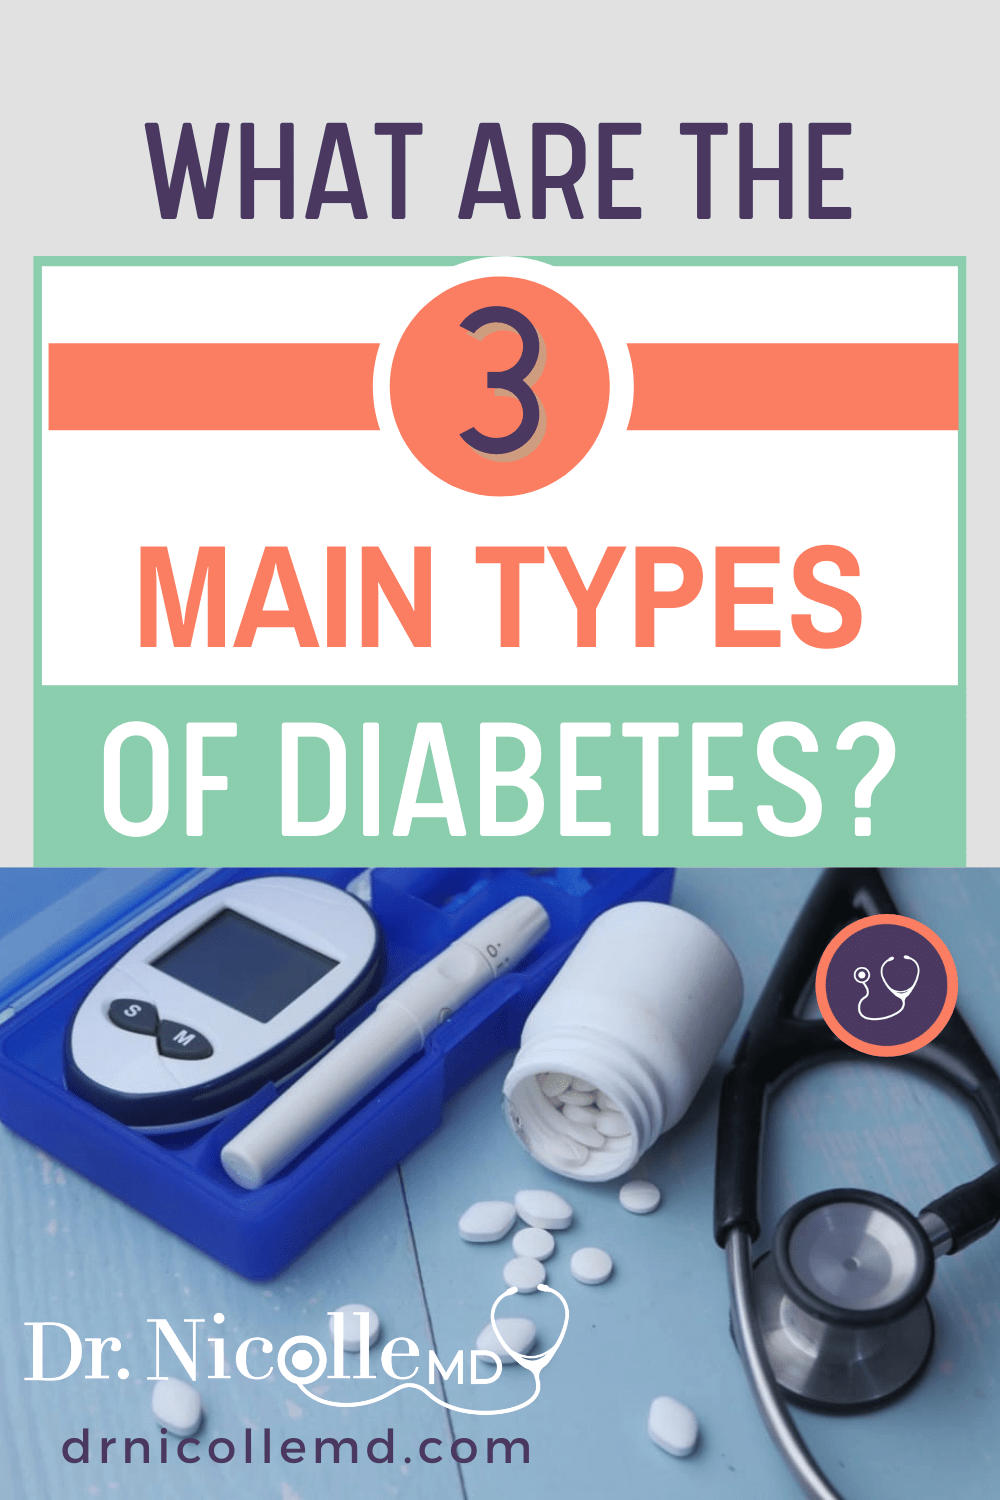 What Are The 3 Main Types Of Diabetes?